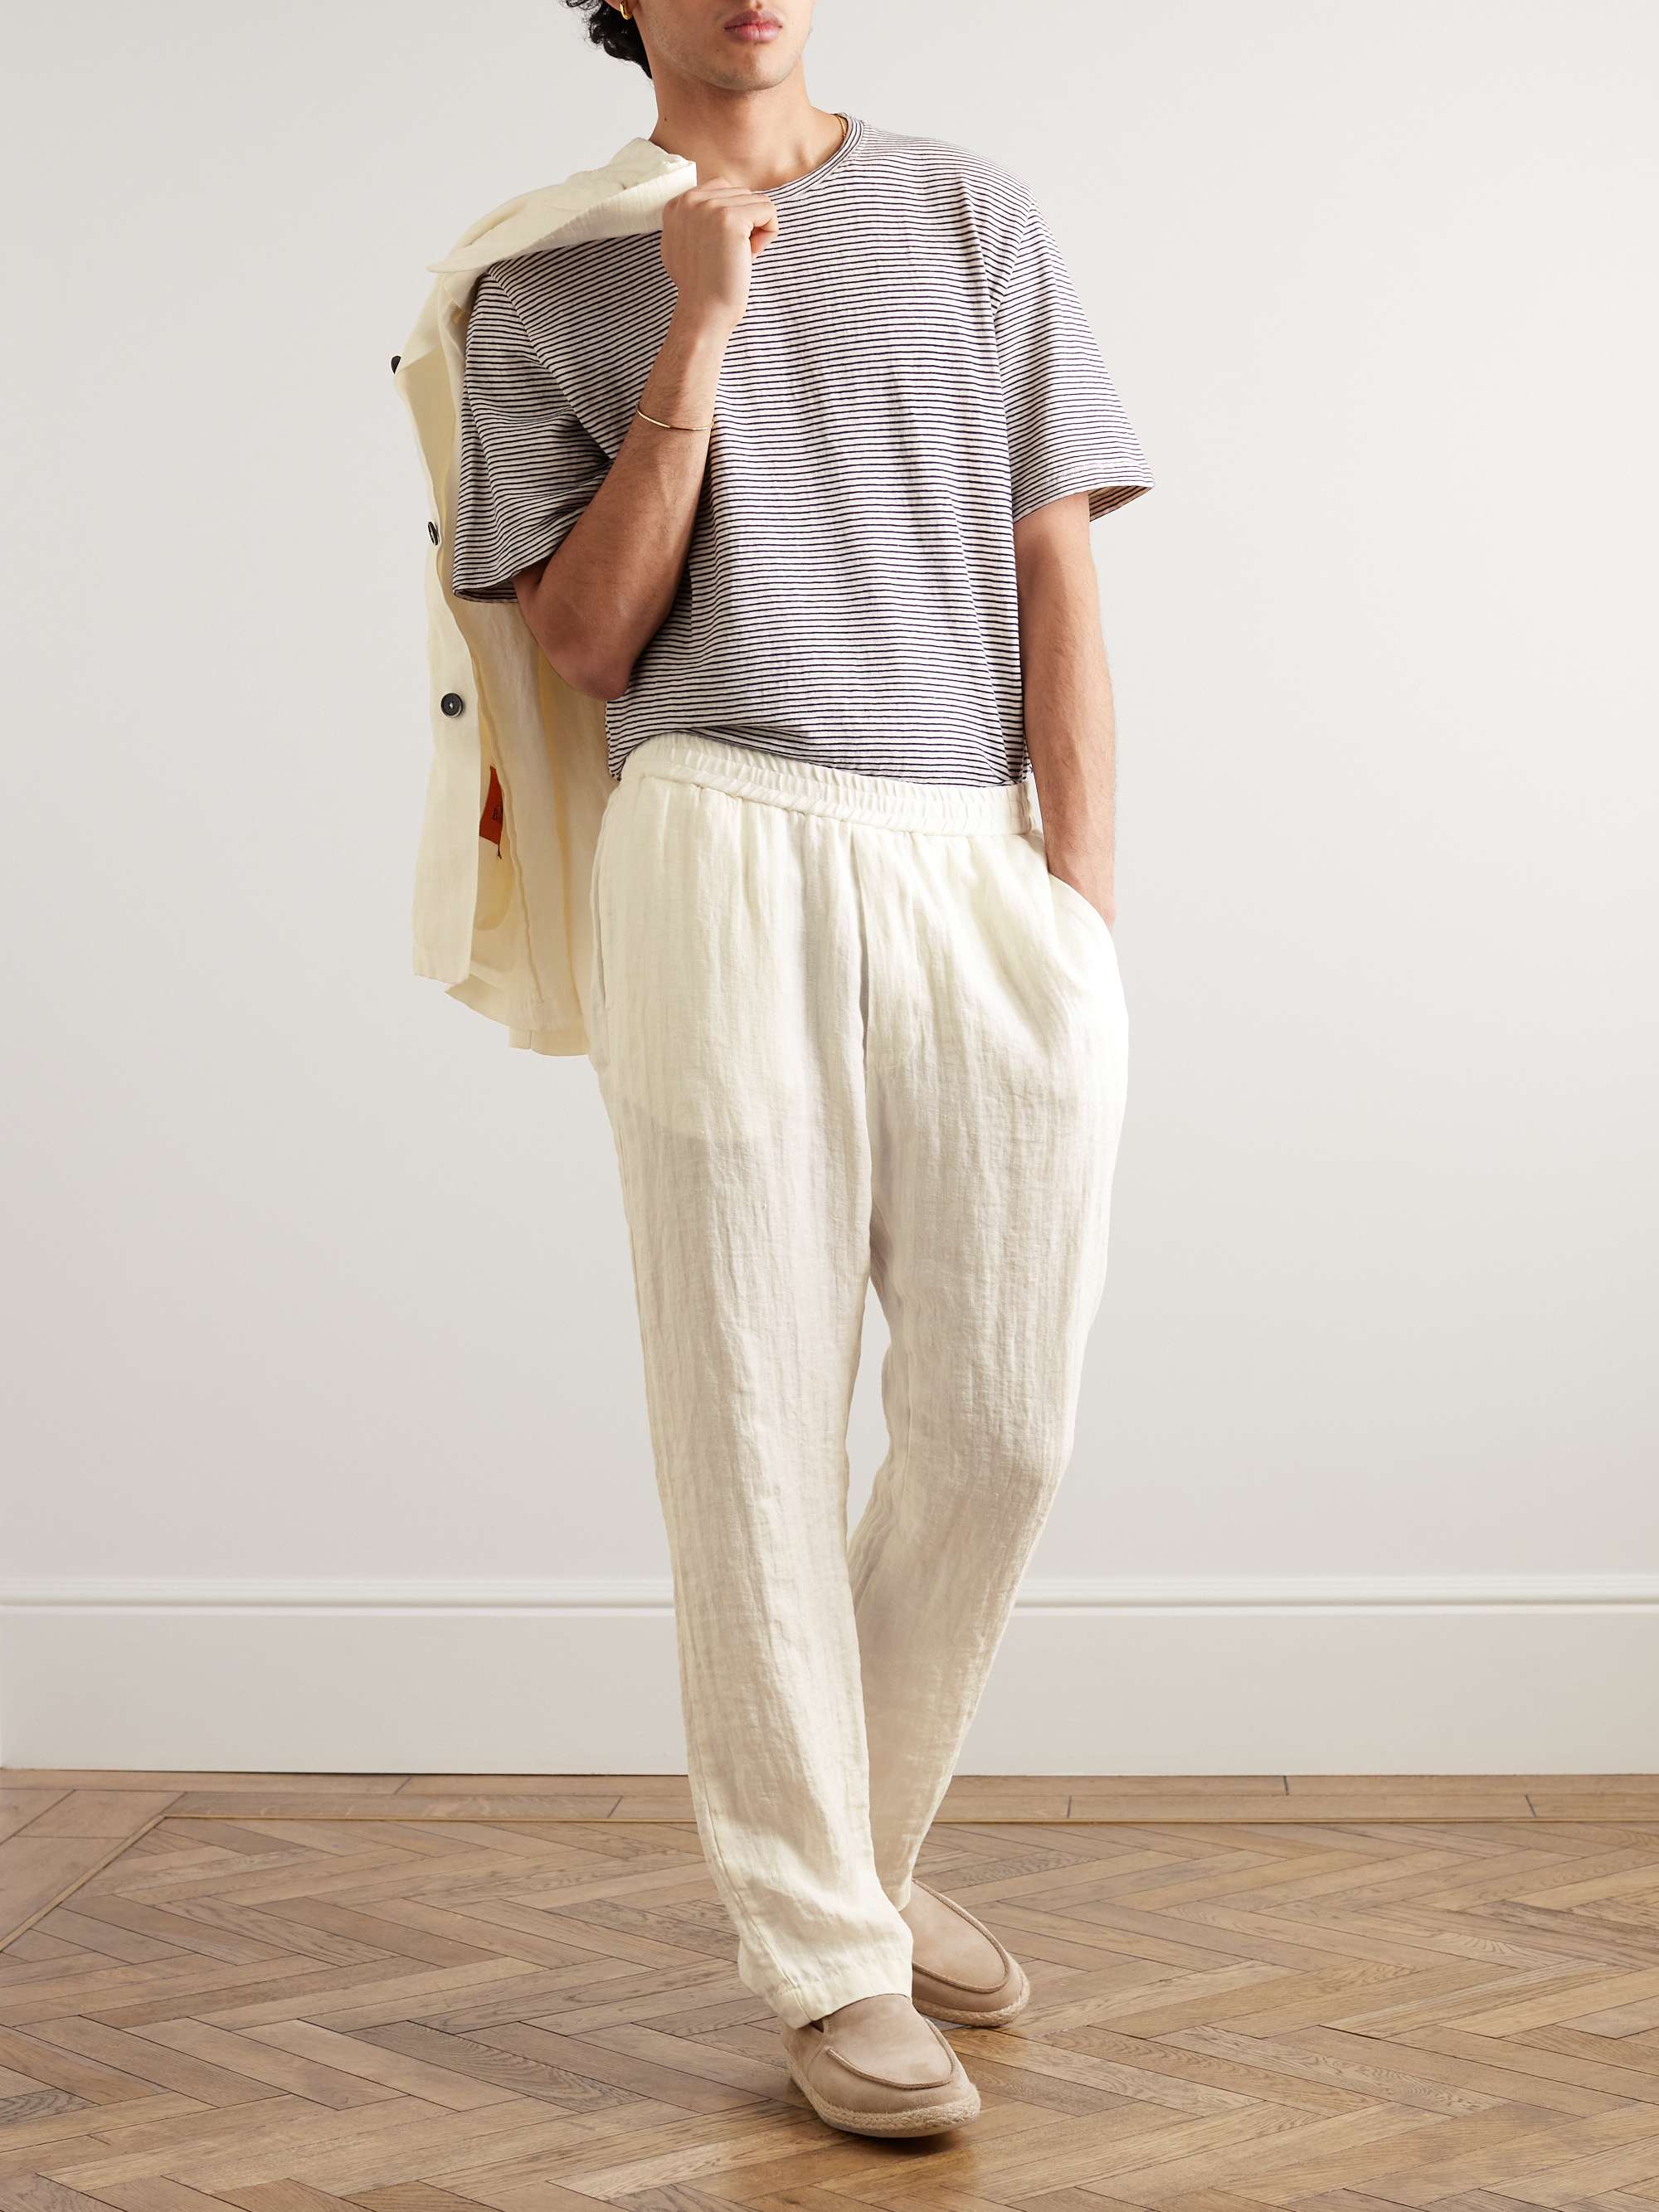 Off-White Drawstring Trousers by Acne Studios on Sale